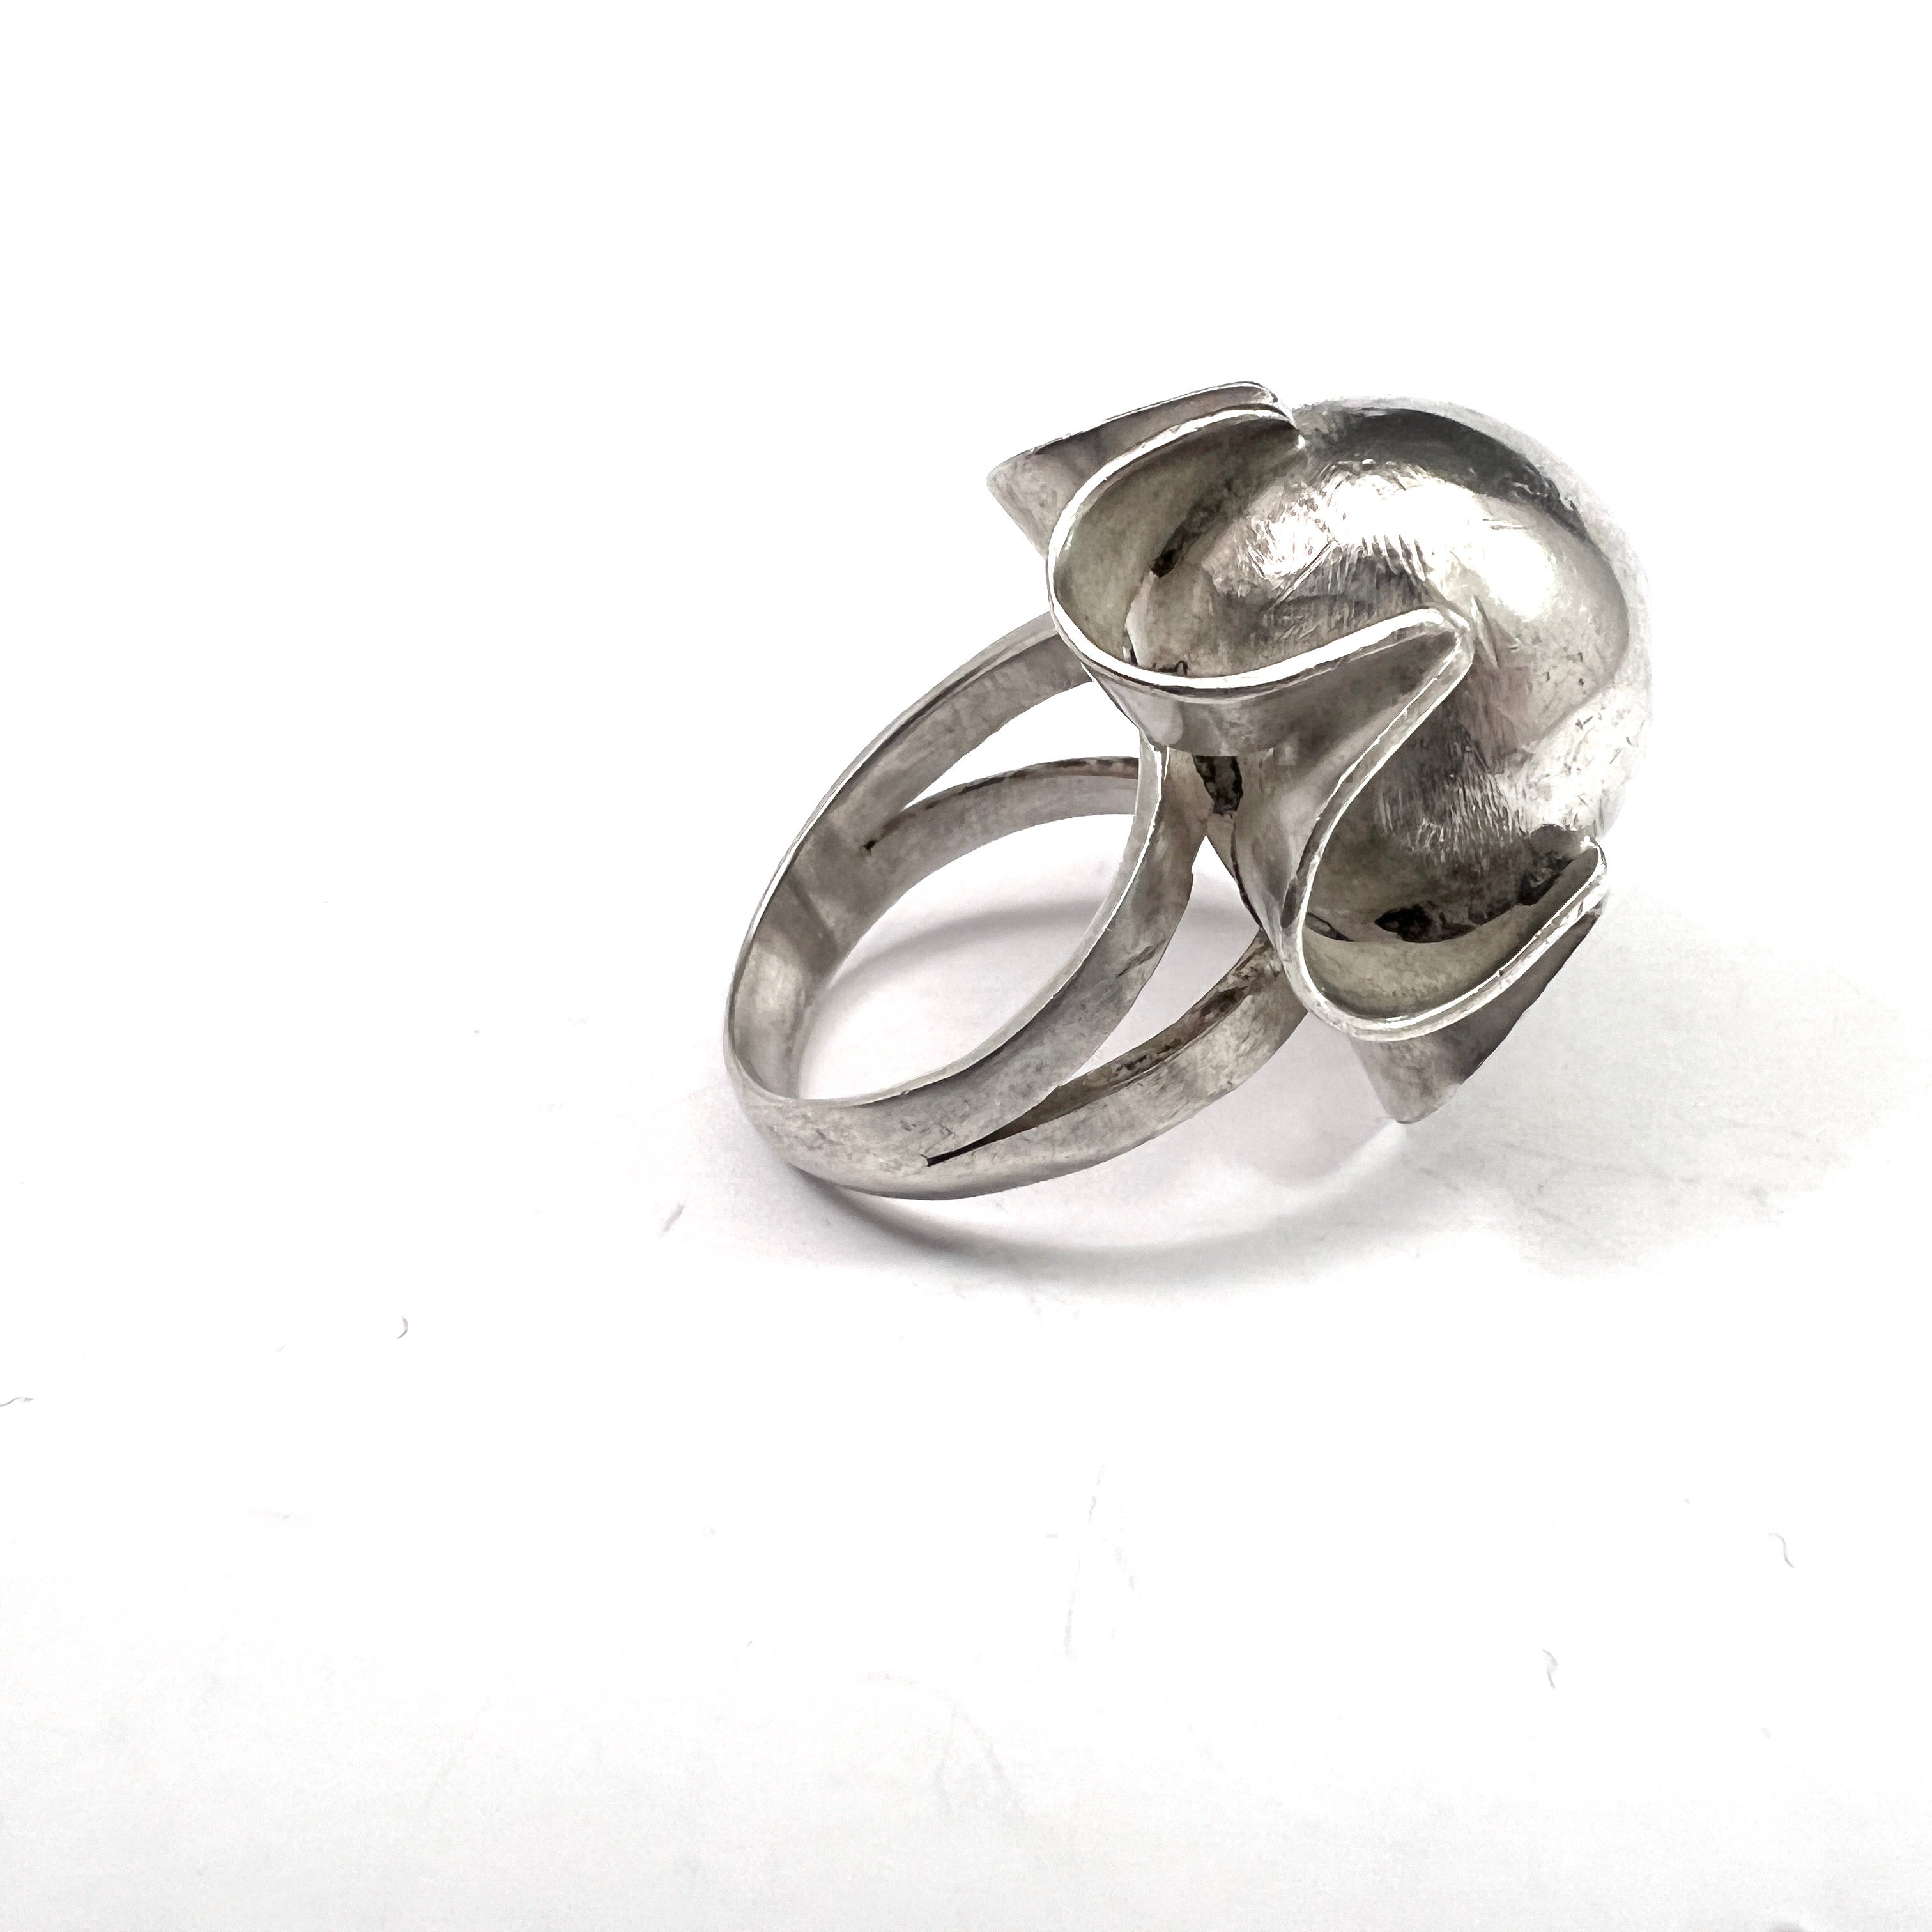 Vintage Silver Sterically Modified Ring宜しくお願い致します